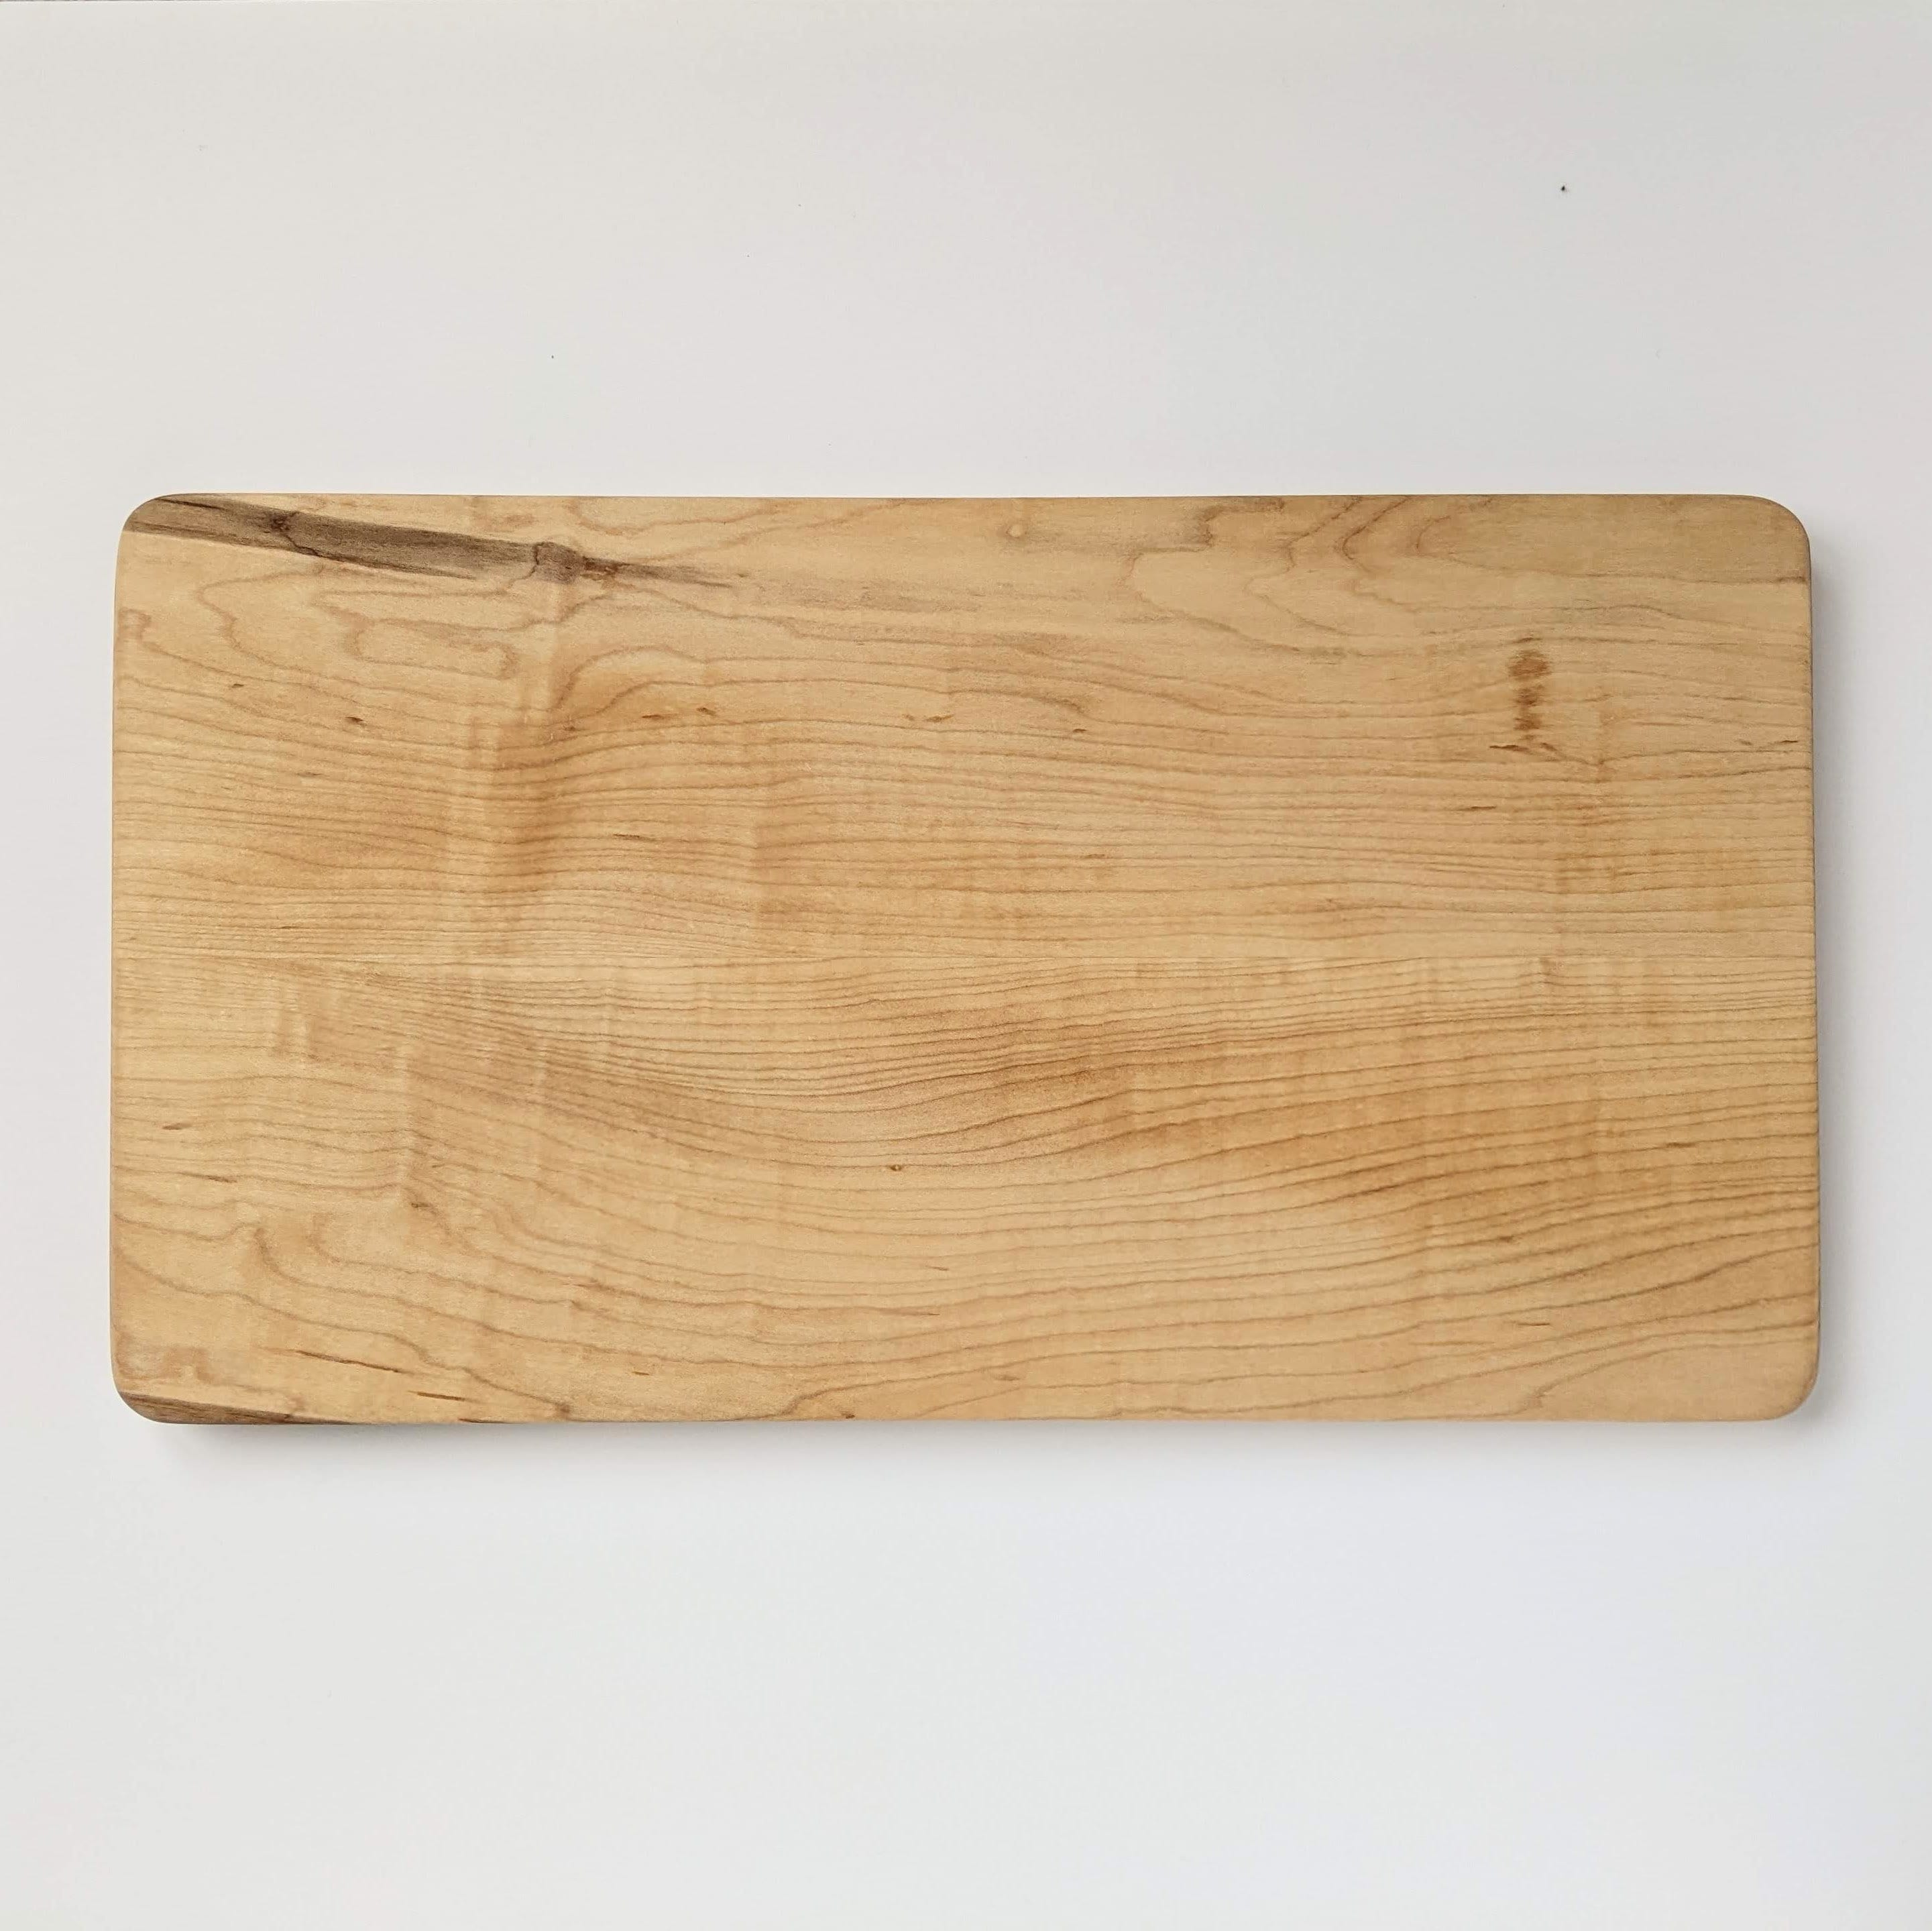 Natural, Non-Toxic Cutting Boards & Eco Friendly Serving Trays